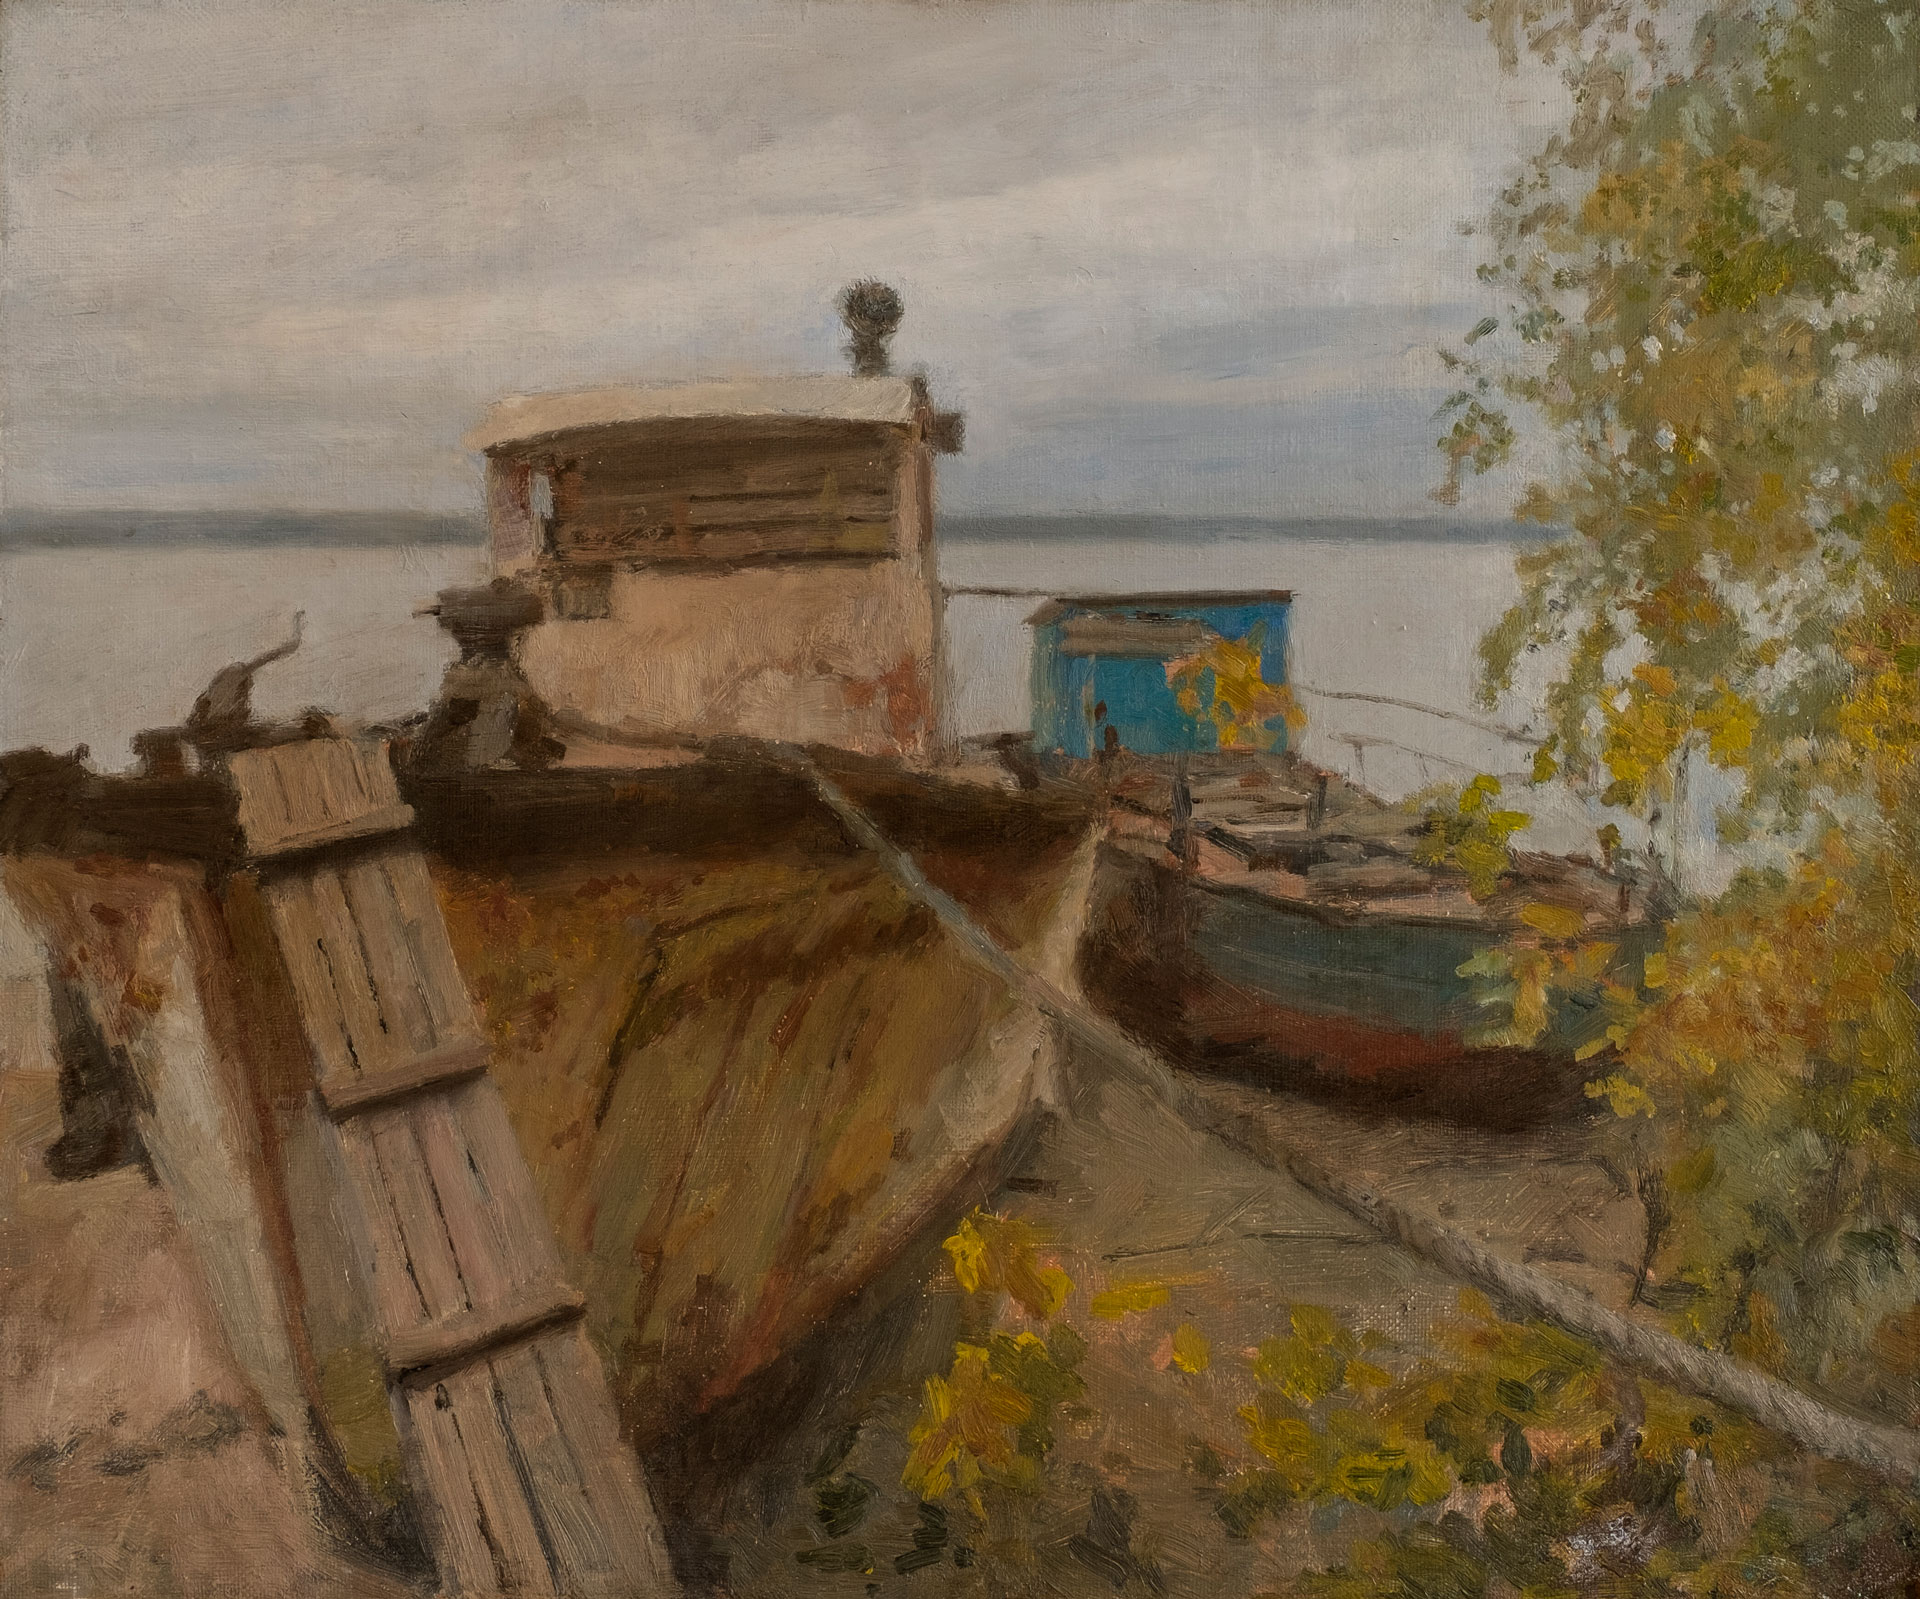 Motive with Boats - 1, Maksim Kaetkin, Buy the painting Oil